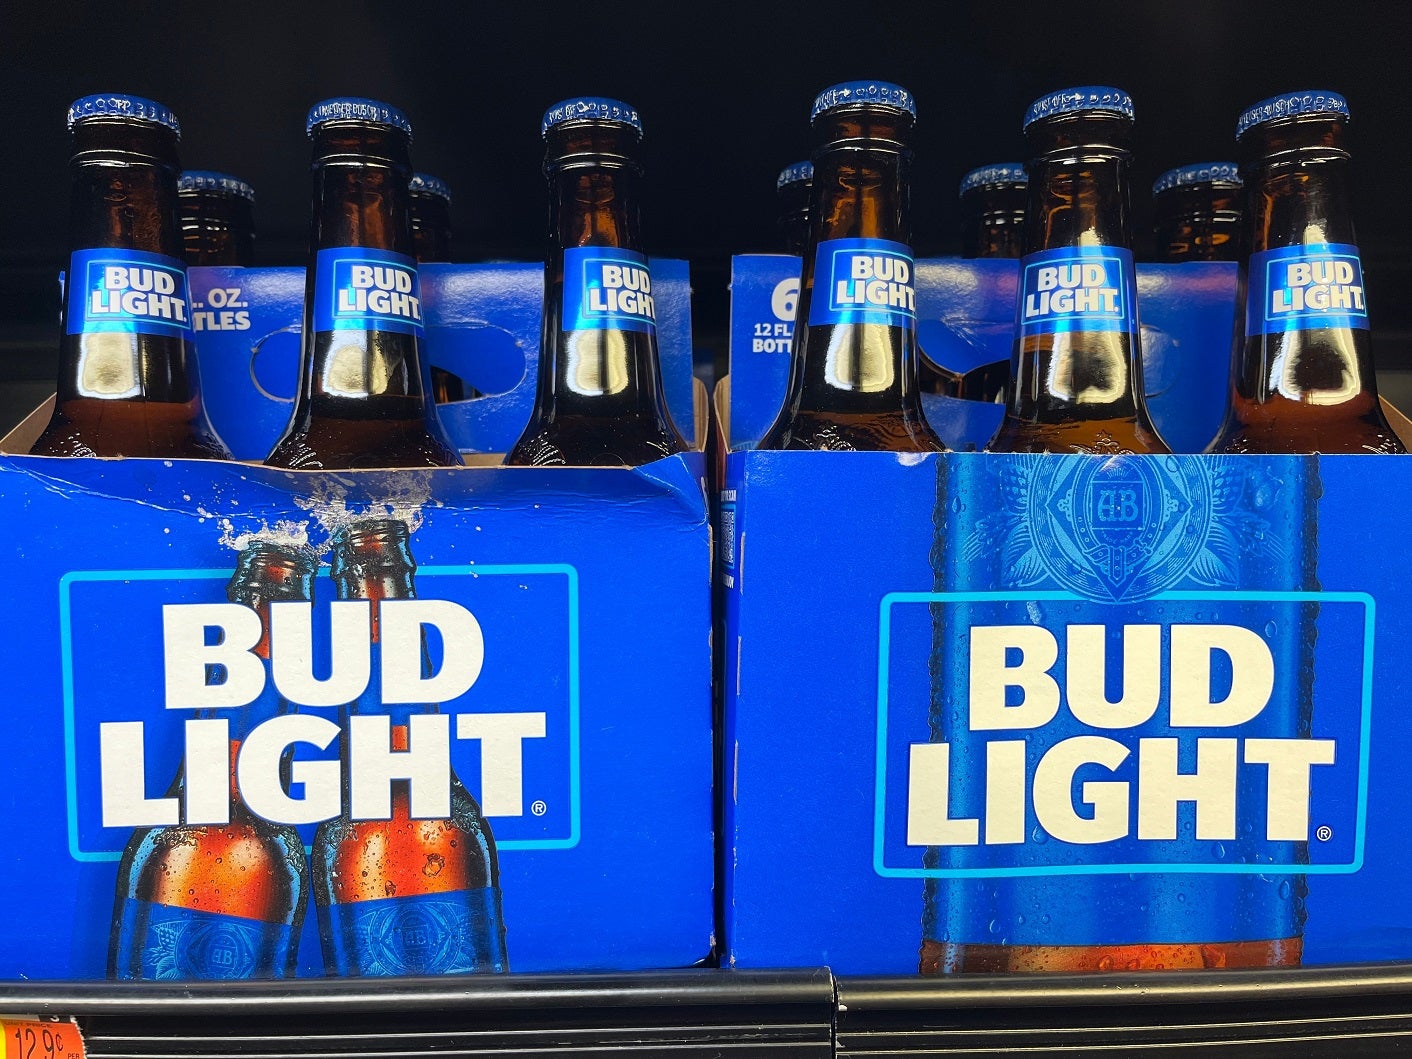 Bud Light “moving in the right direction”, AB InBev CEO says